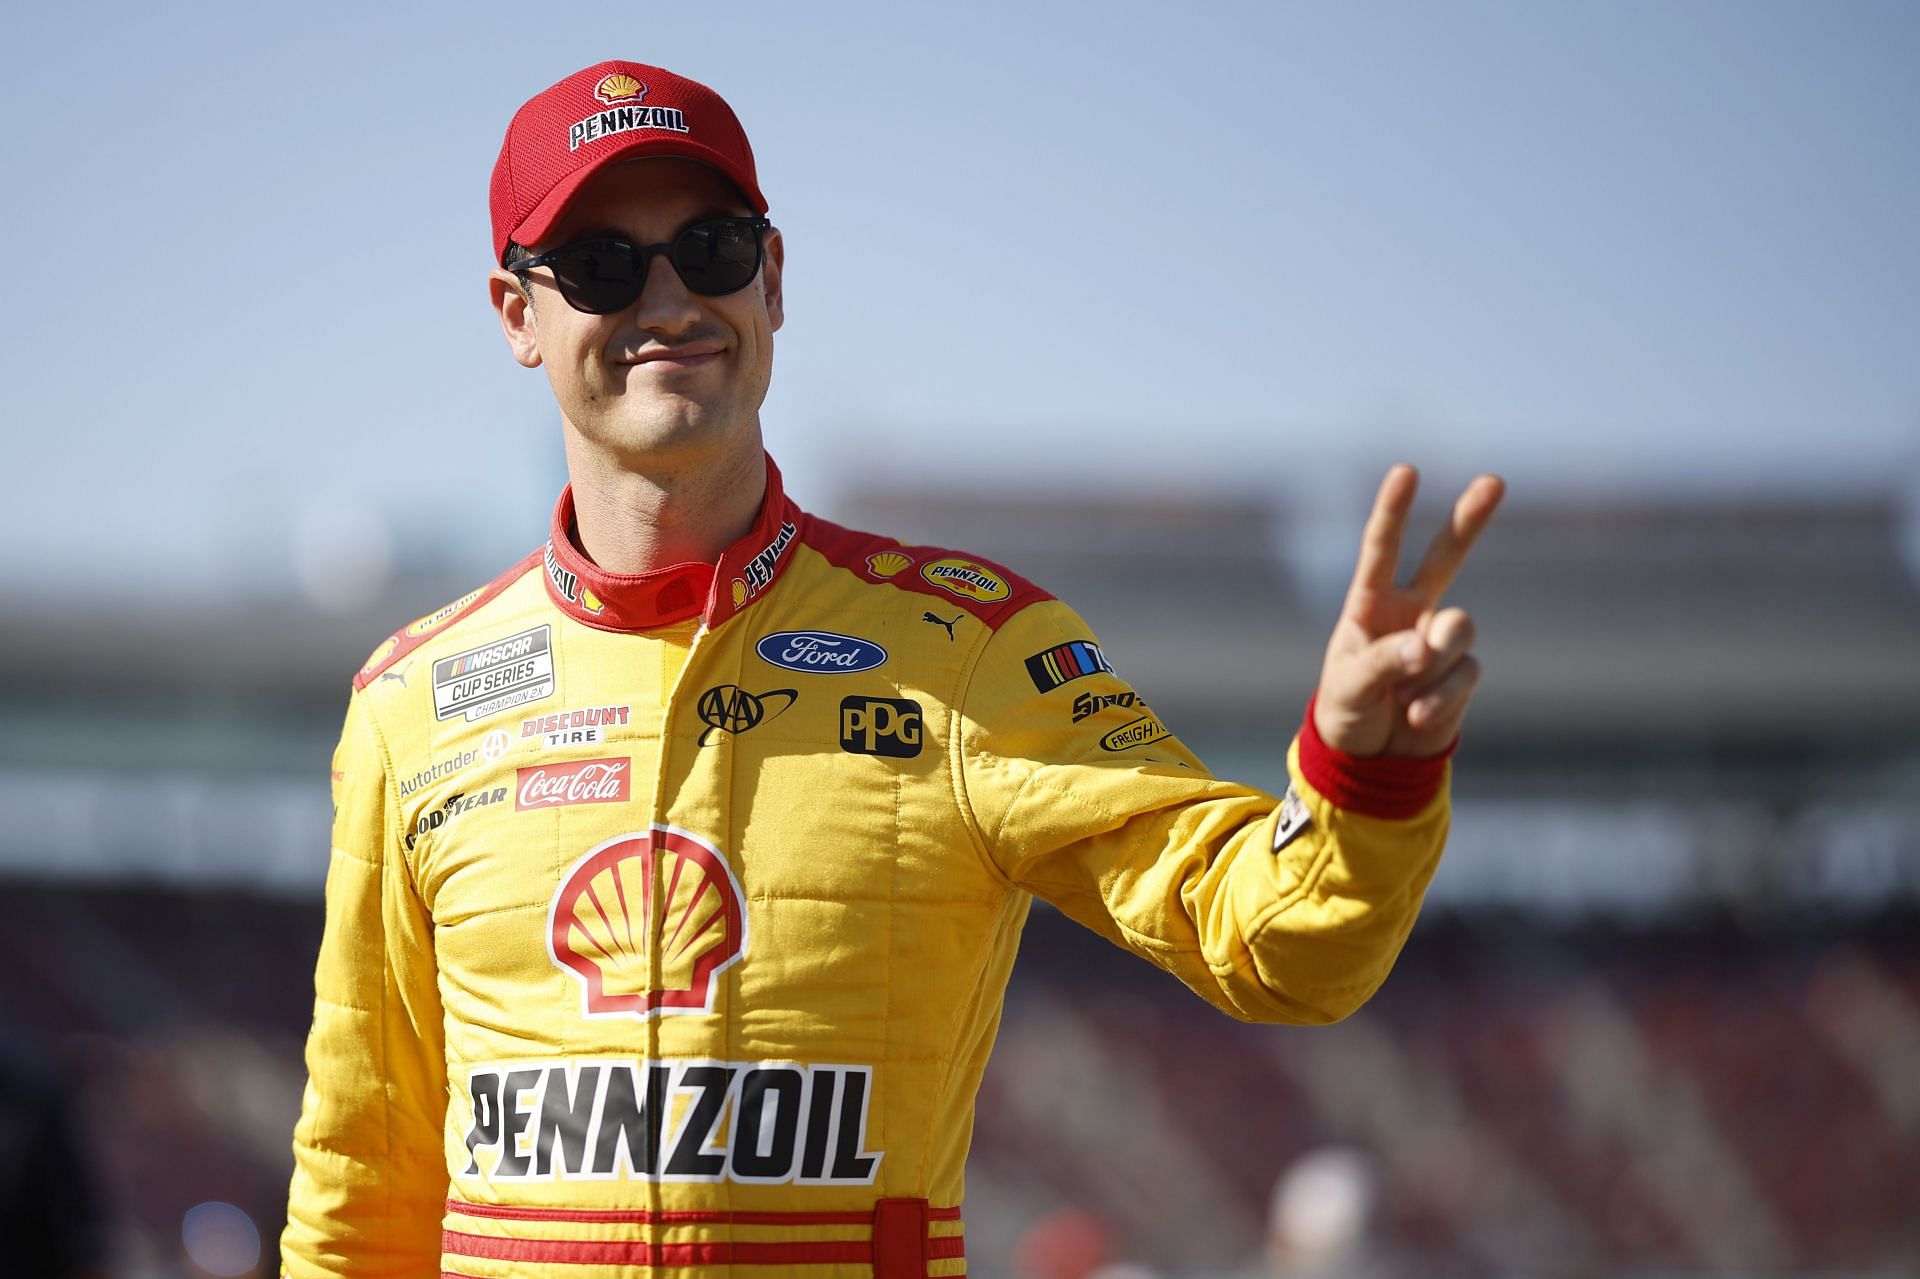 "You’ve got to be good at all of them" Joey Logano shares his view